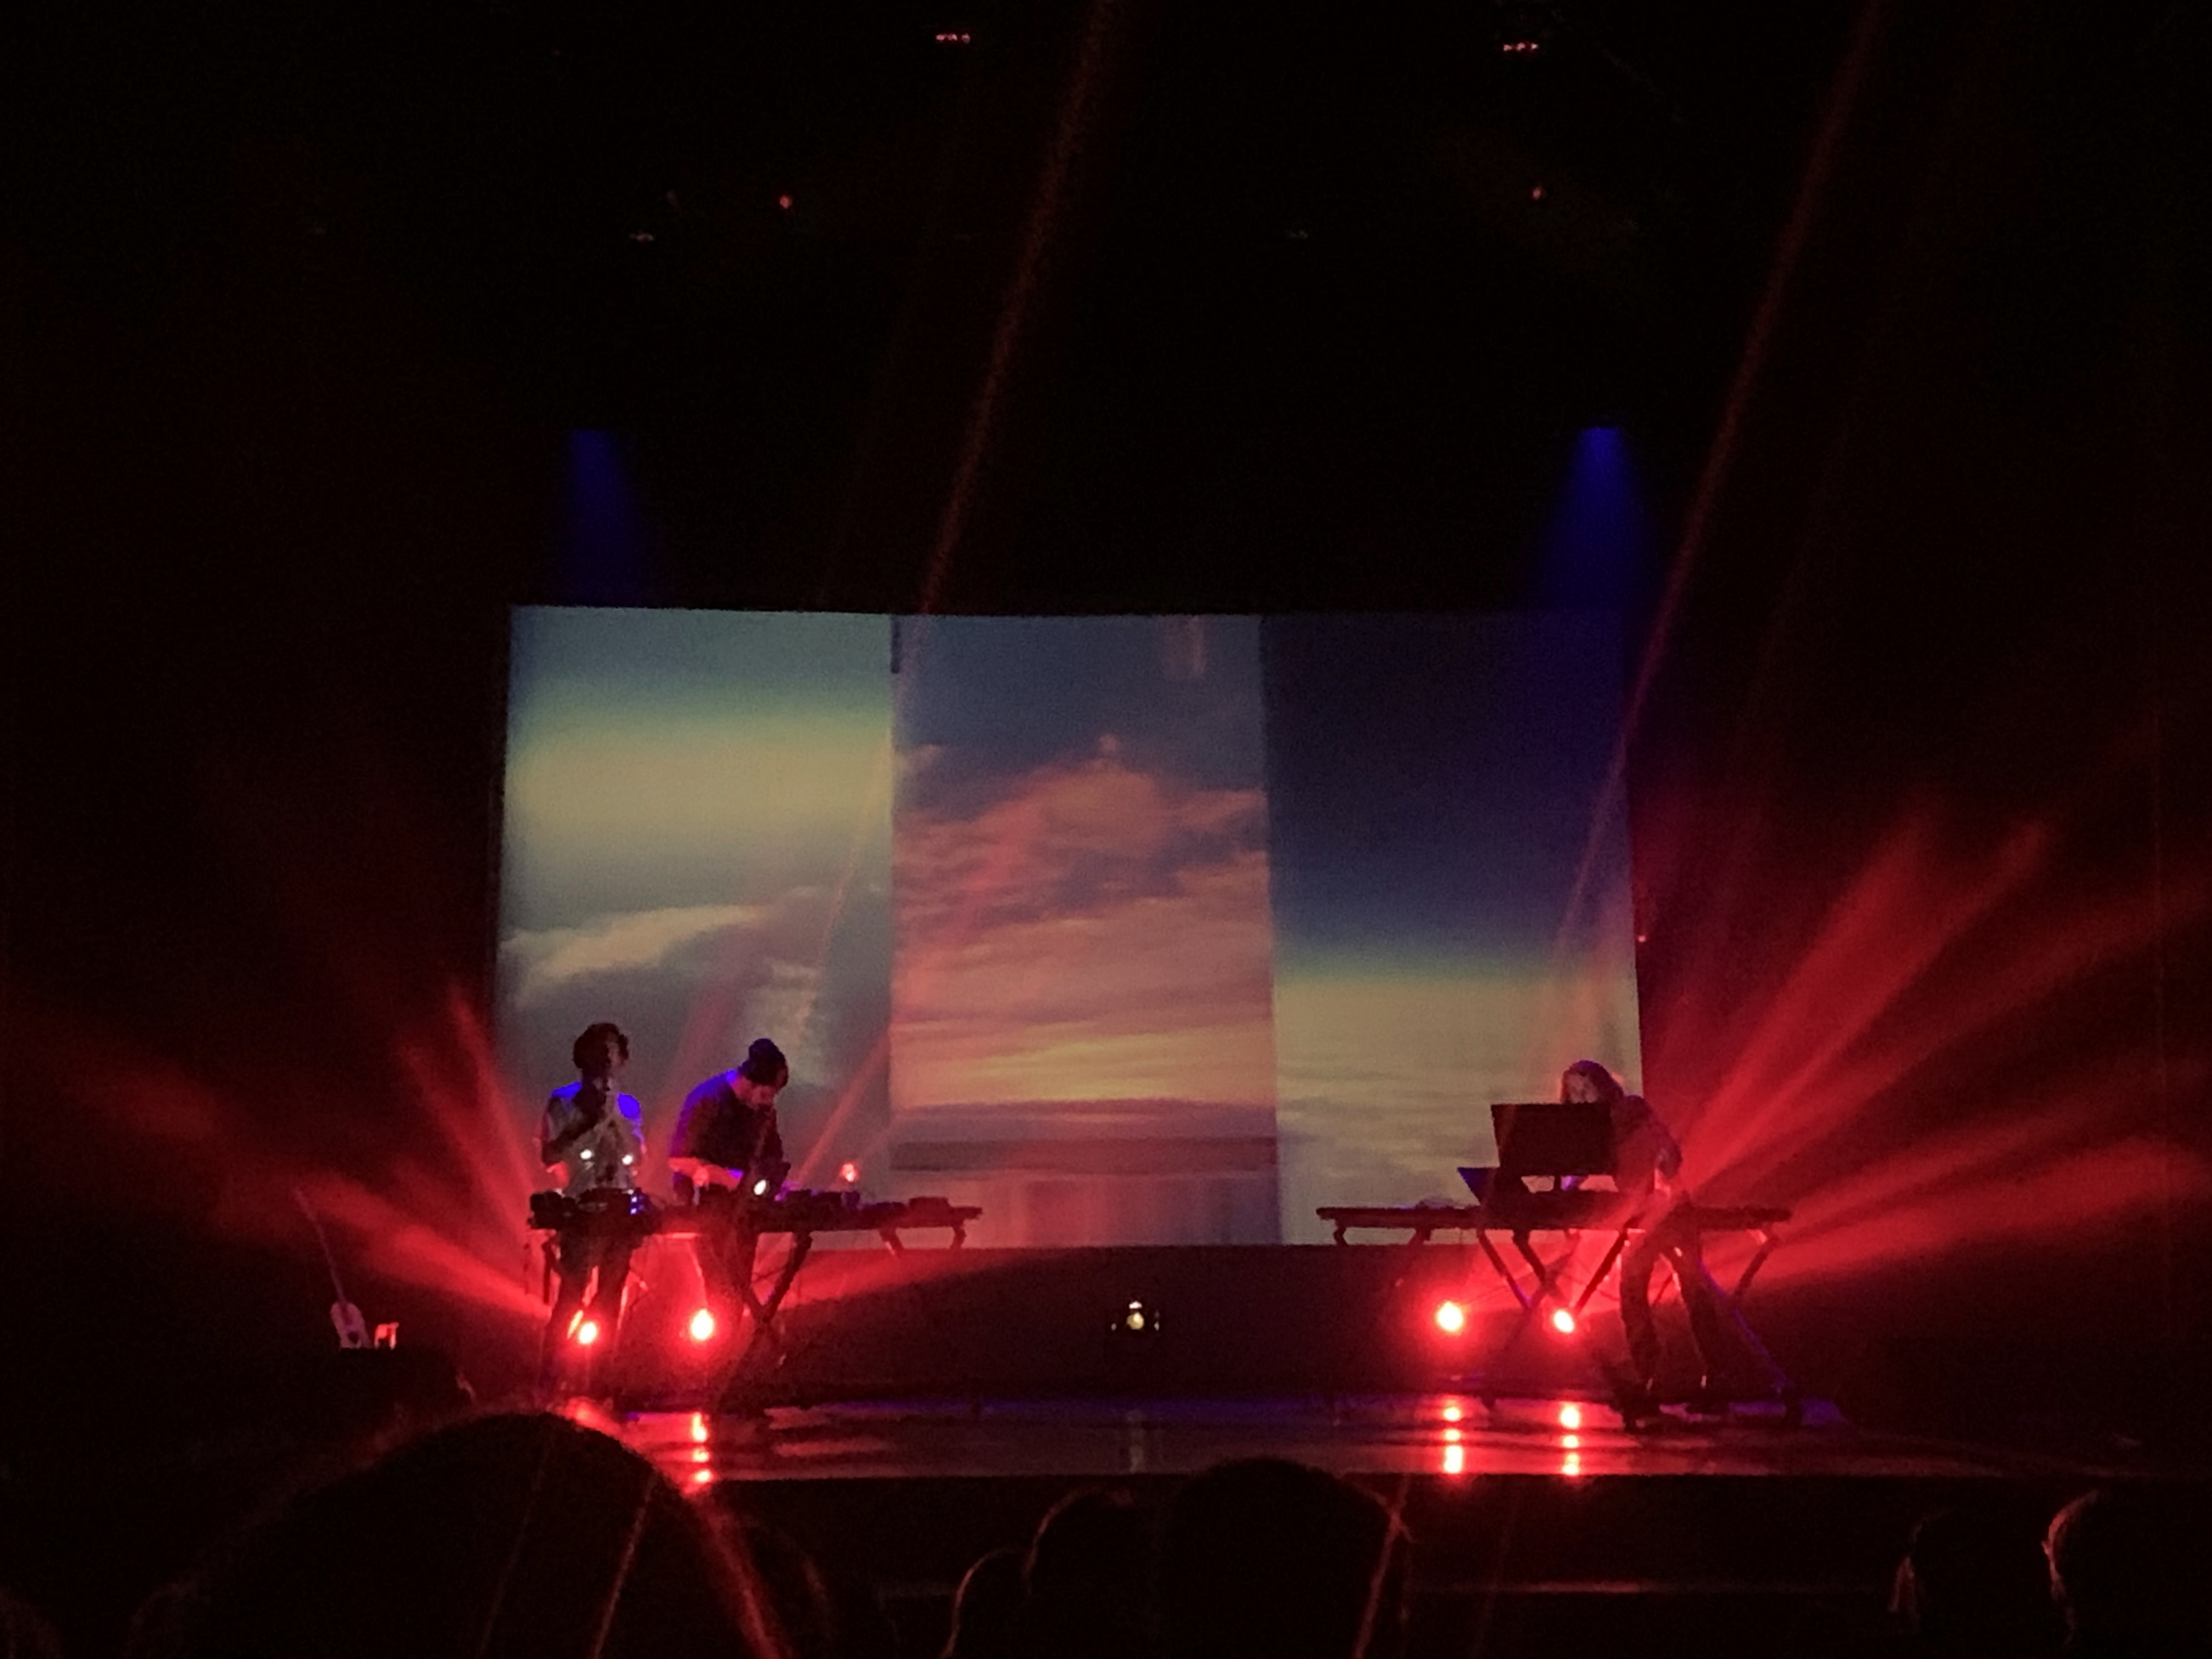 h0b0 in a band setting, performing live in front of a projection with footage of the sky and warm lights